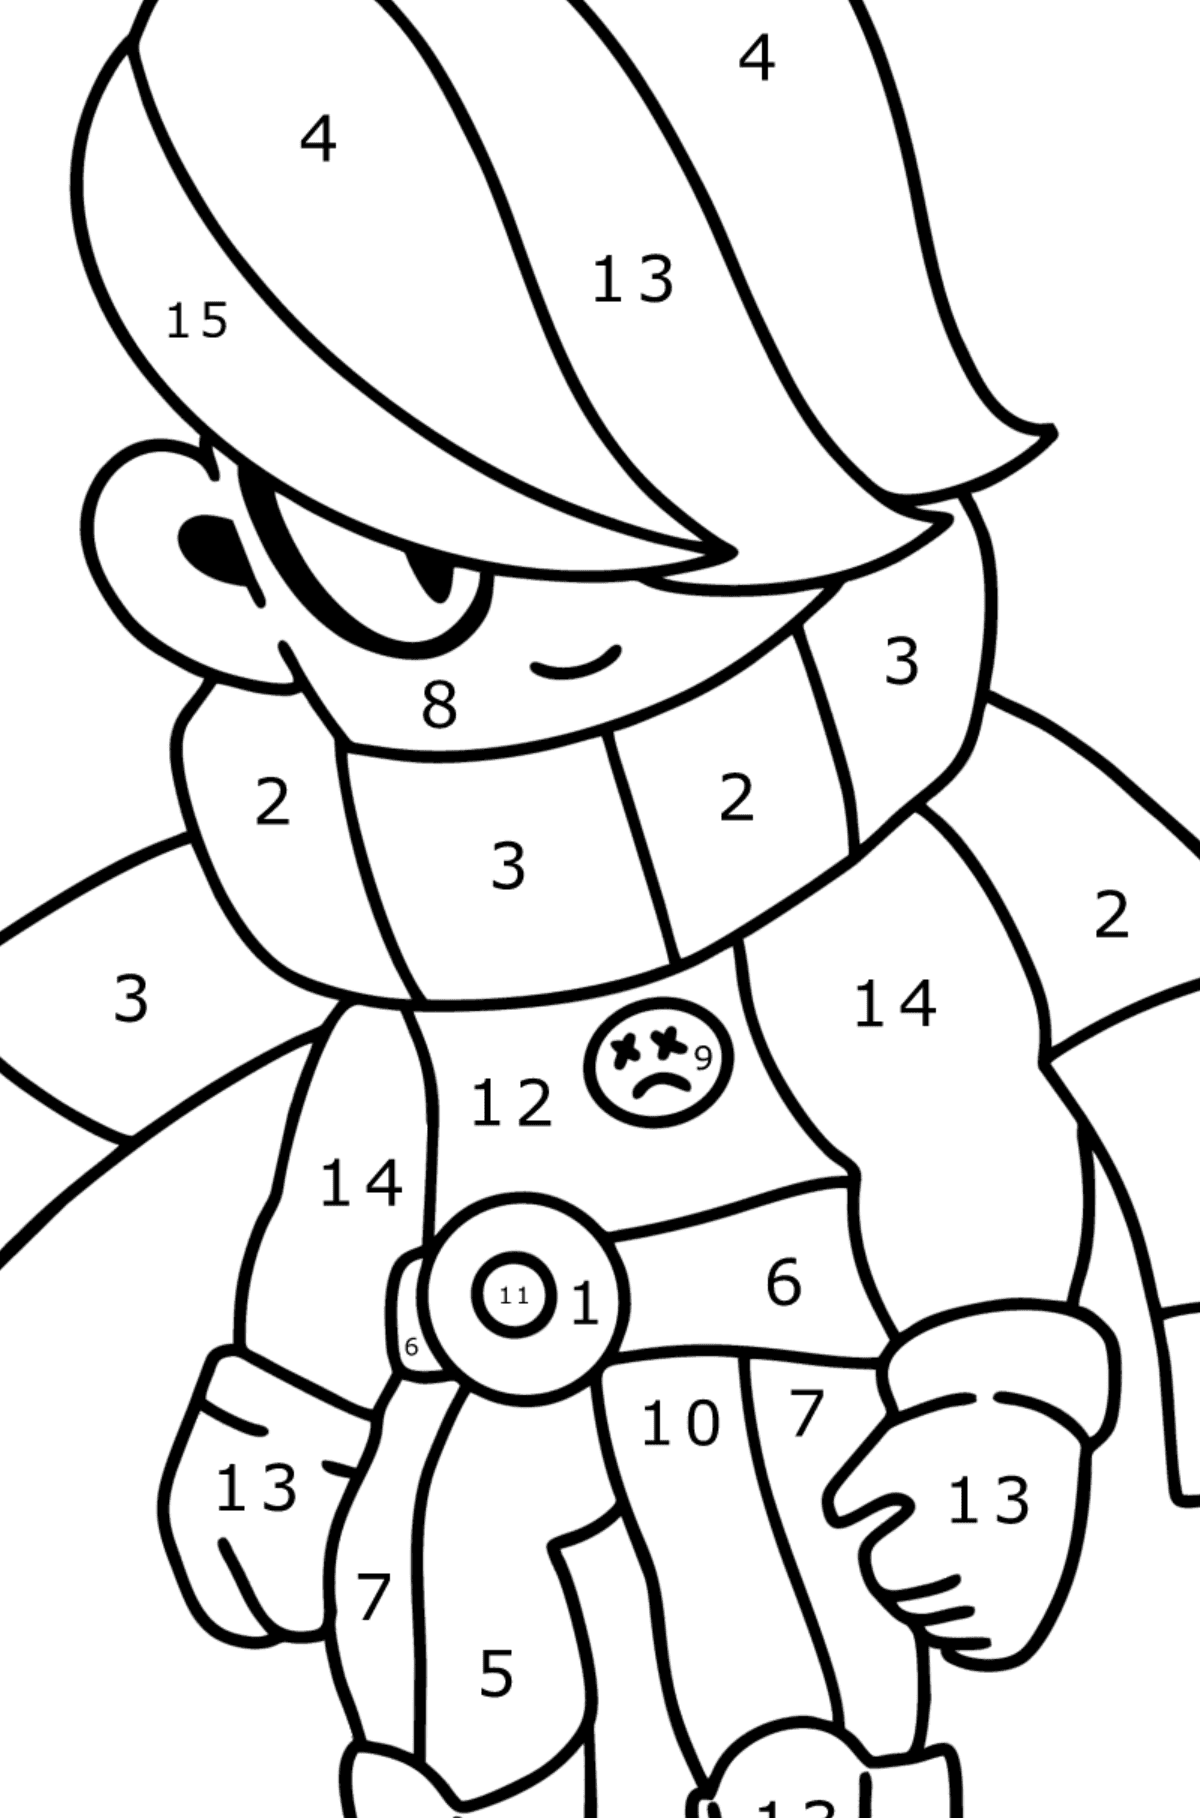 Brawl Stars Edgar coloring page - Coloring by Numbers for Kids